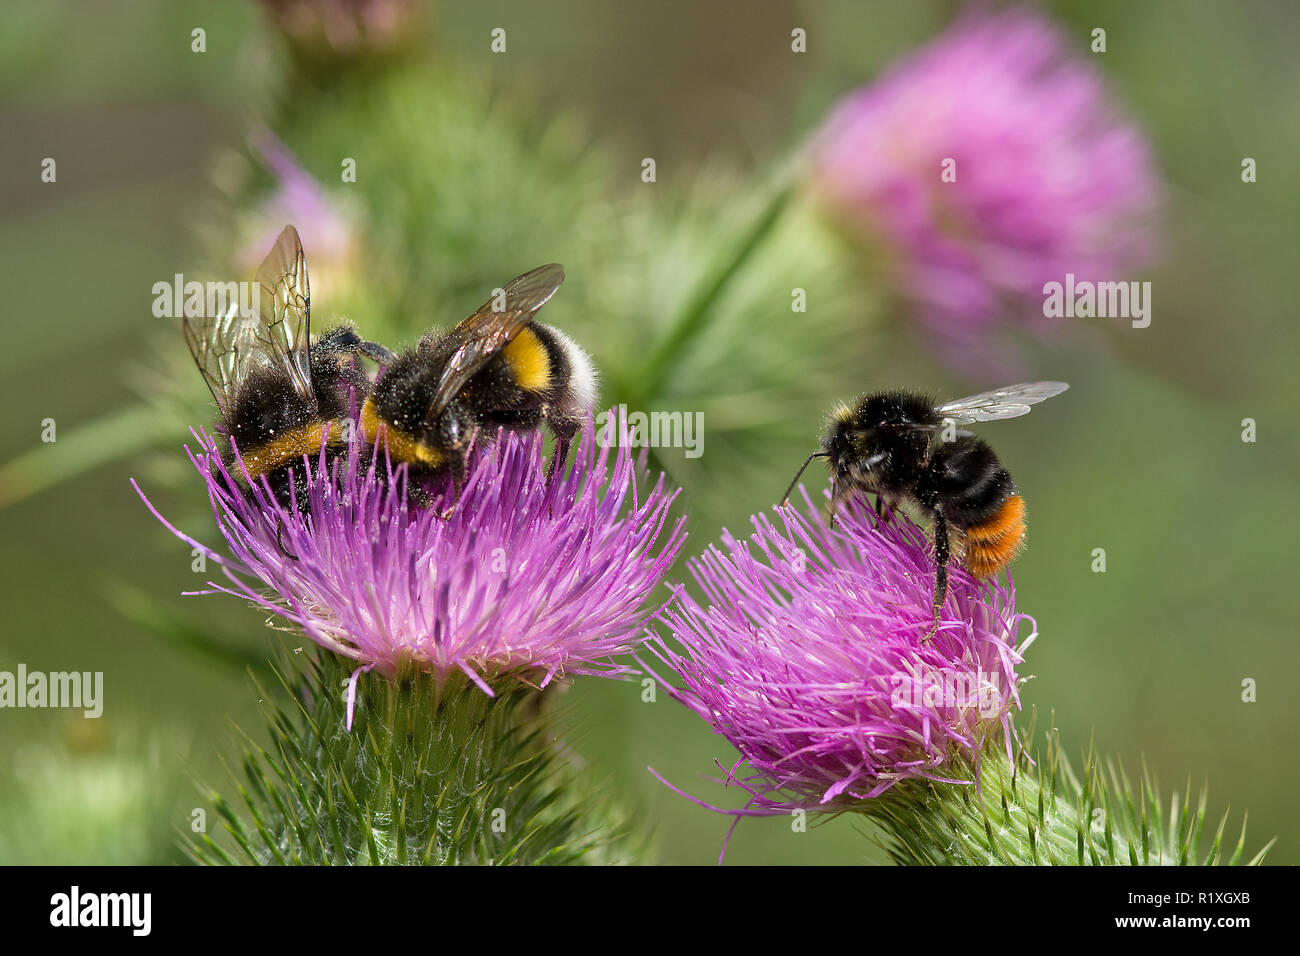 Buff-tailed Bumble Bees (Bombus terrestris) and Red-tailed Bumblebee (Bombus lapidarius) drinking nectar from a flower of a Bull Thistle (Cirsium vulgare). Germany Stock Photo